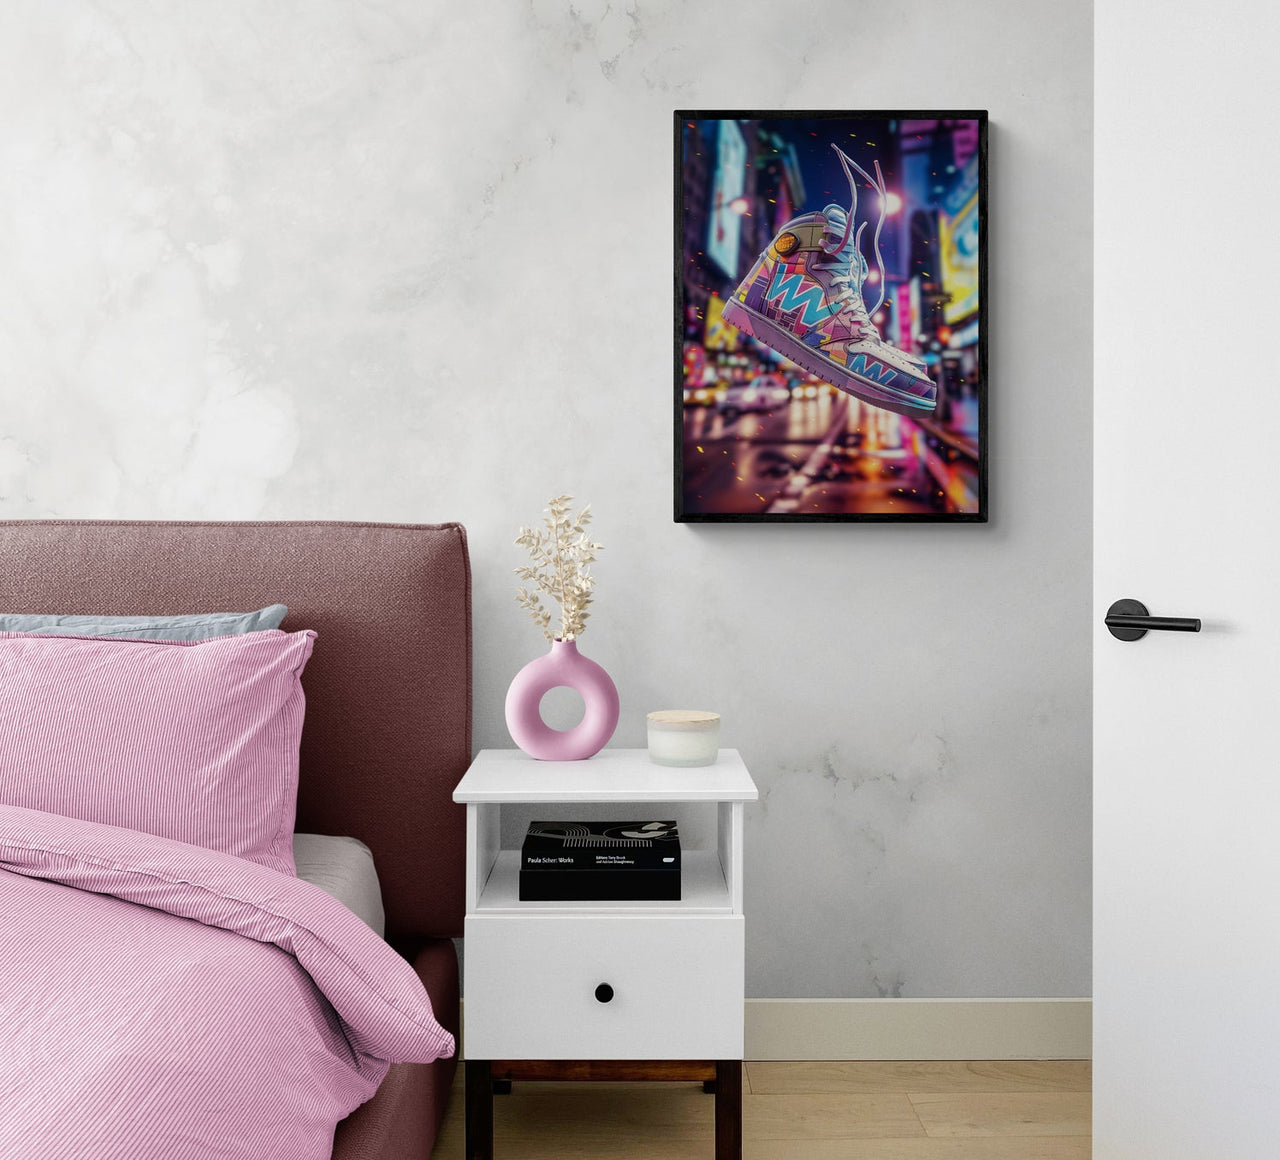 Eclectic framed poster print from Milton Wes Art featuring vibrant, neon-lit street art and urban imagery, adding a pop of color to a modern bedroom with chic decor, available at miltonwesart.com, Harlem NYC